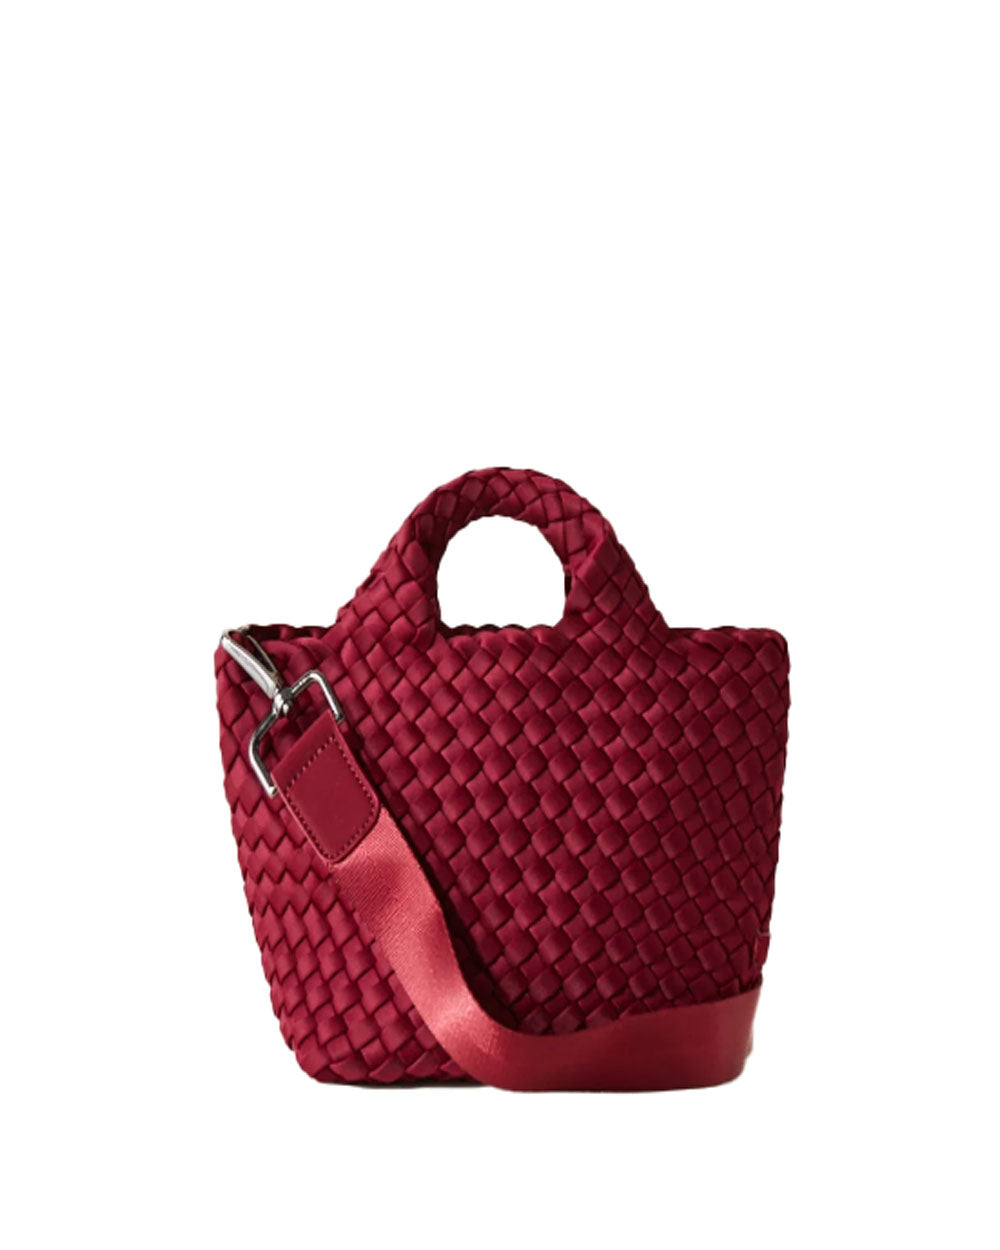 St. Barths Petite Tote in Rosewood